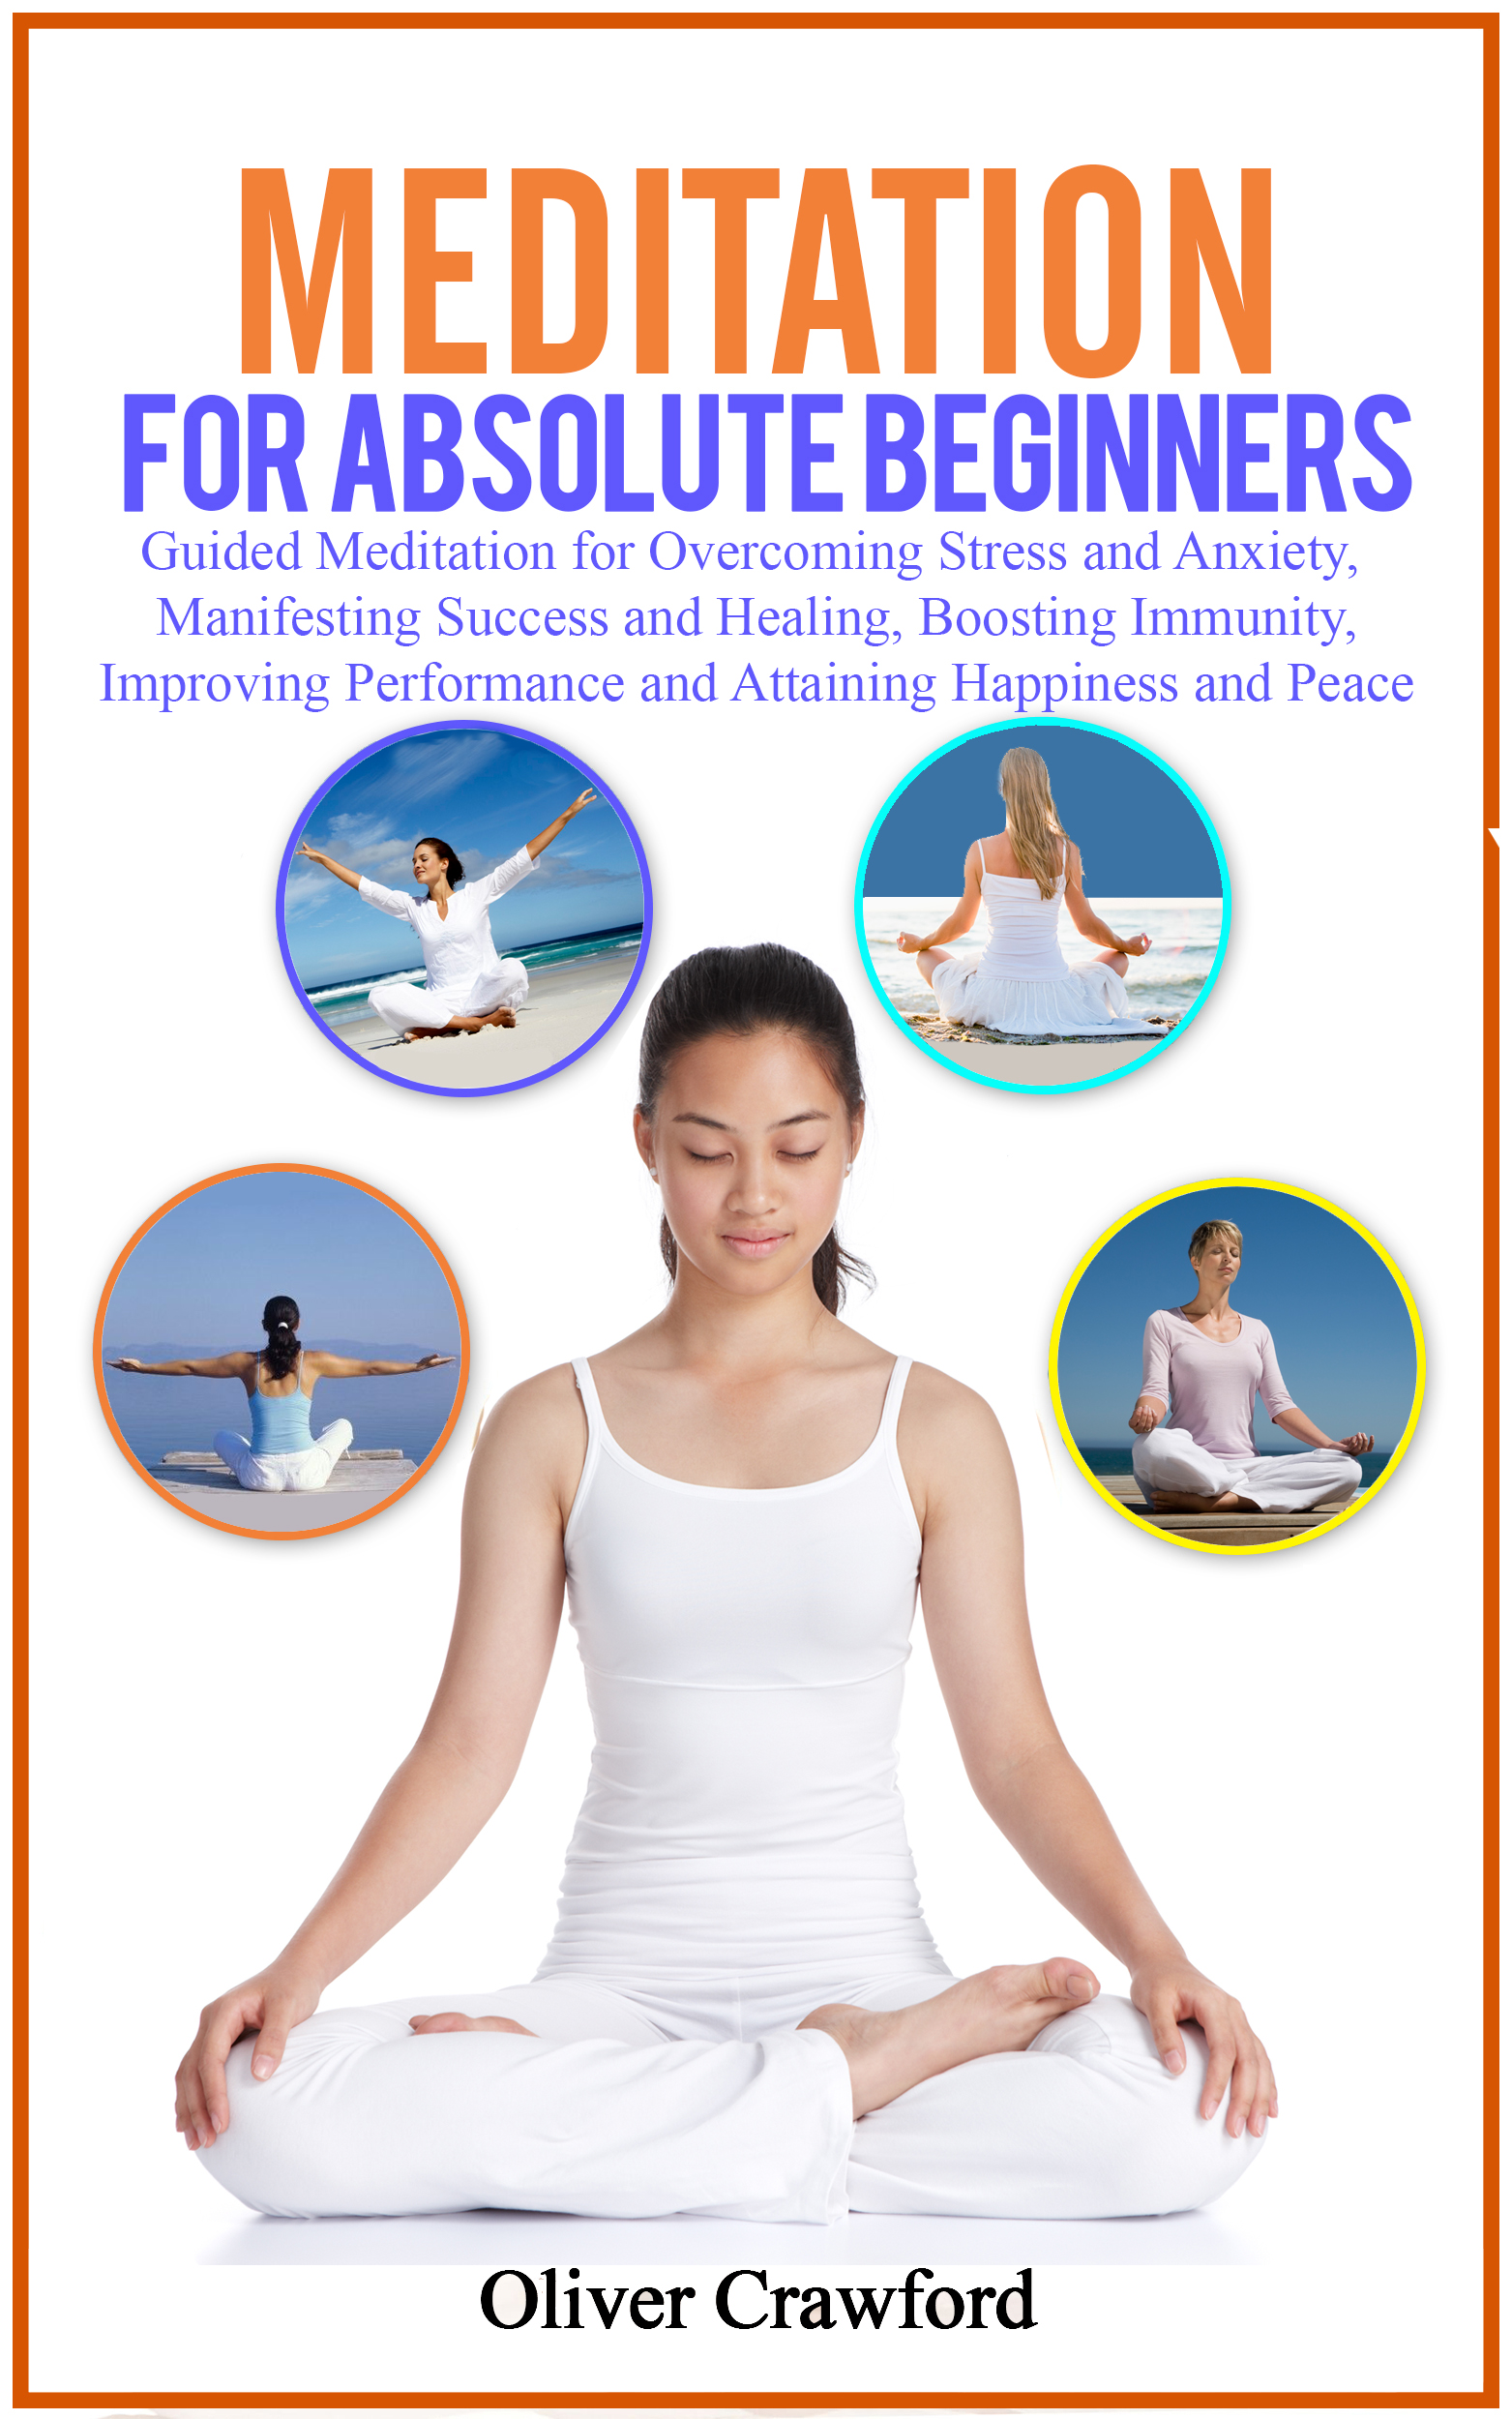 FREE: Meditation for absolute beginners by Oliver Crawford